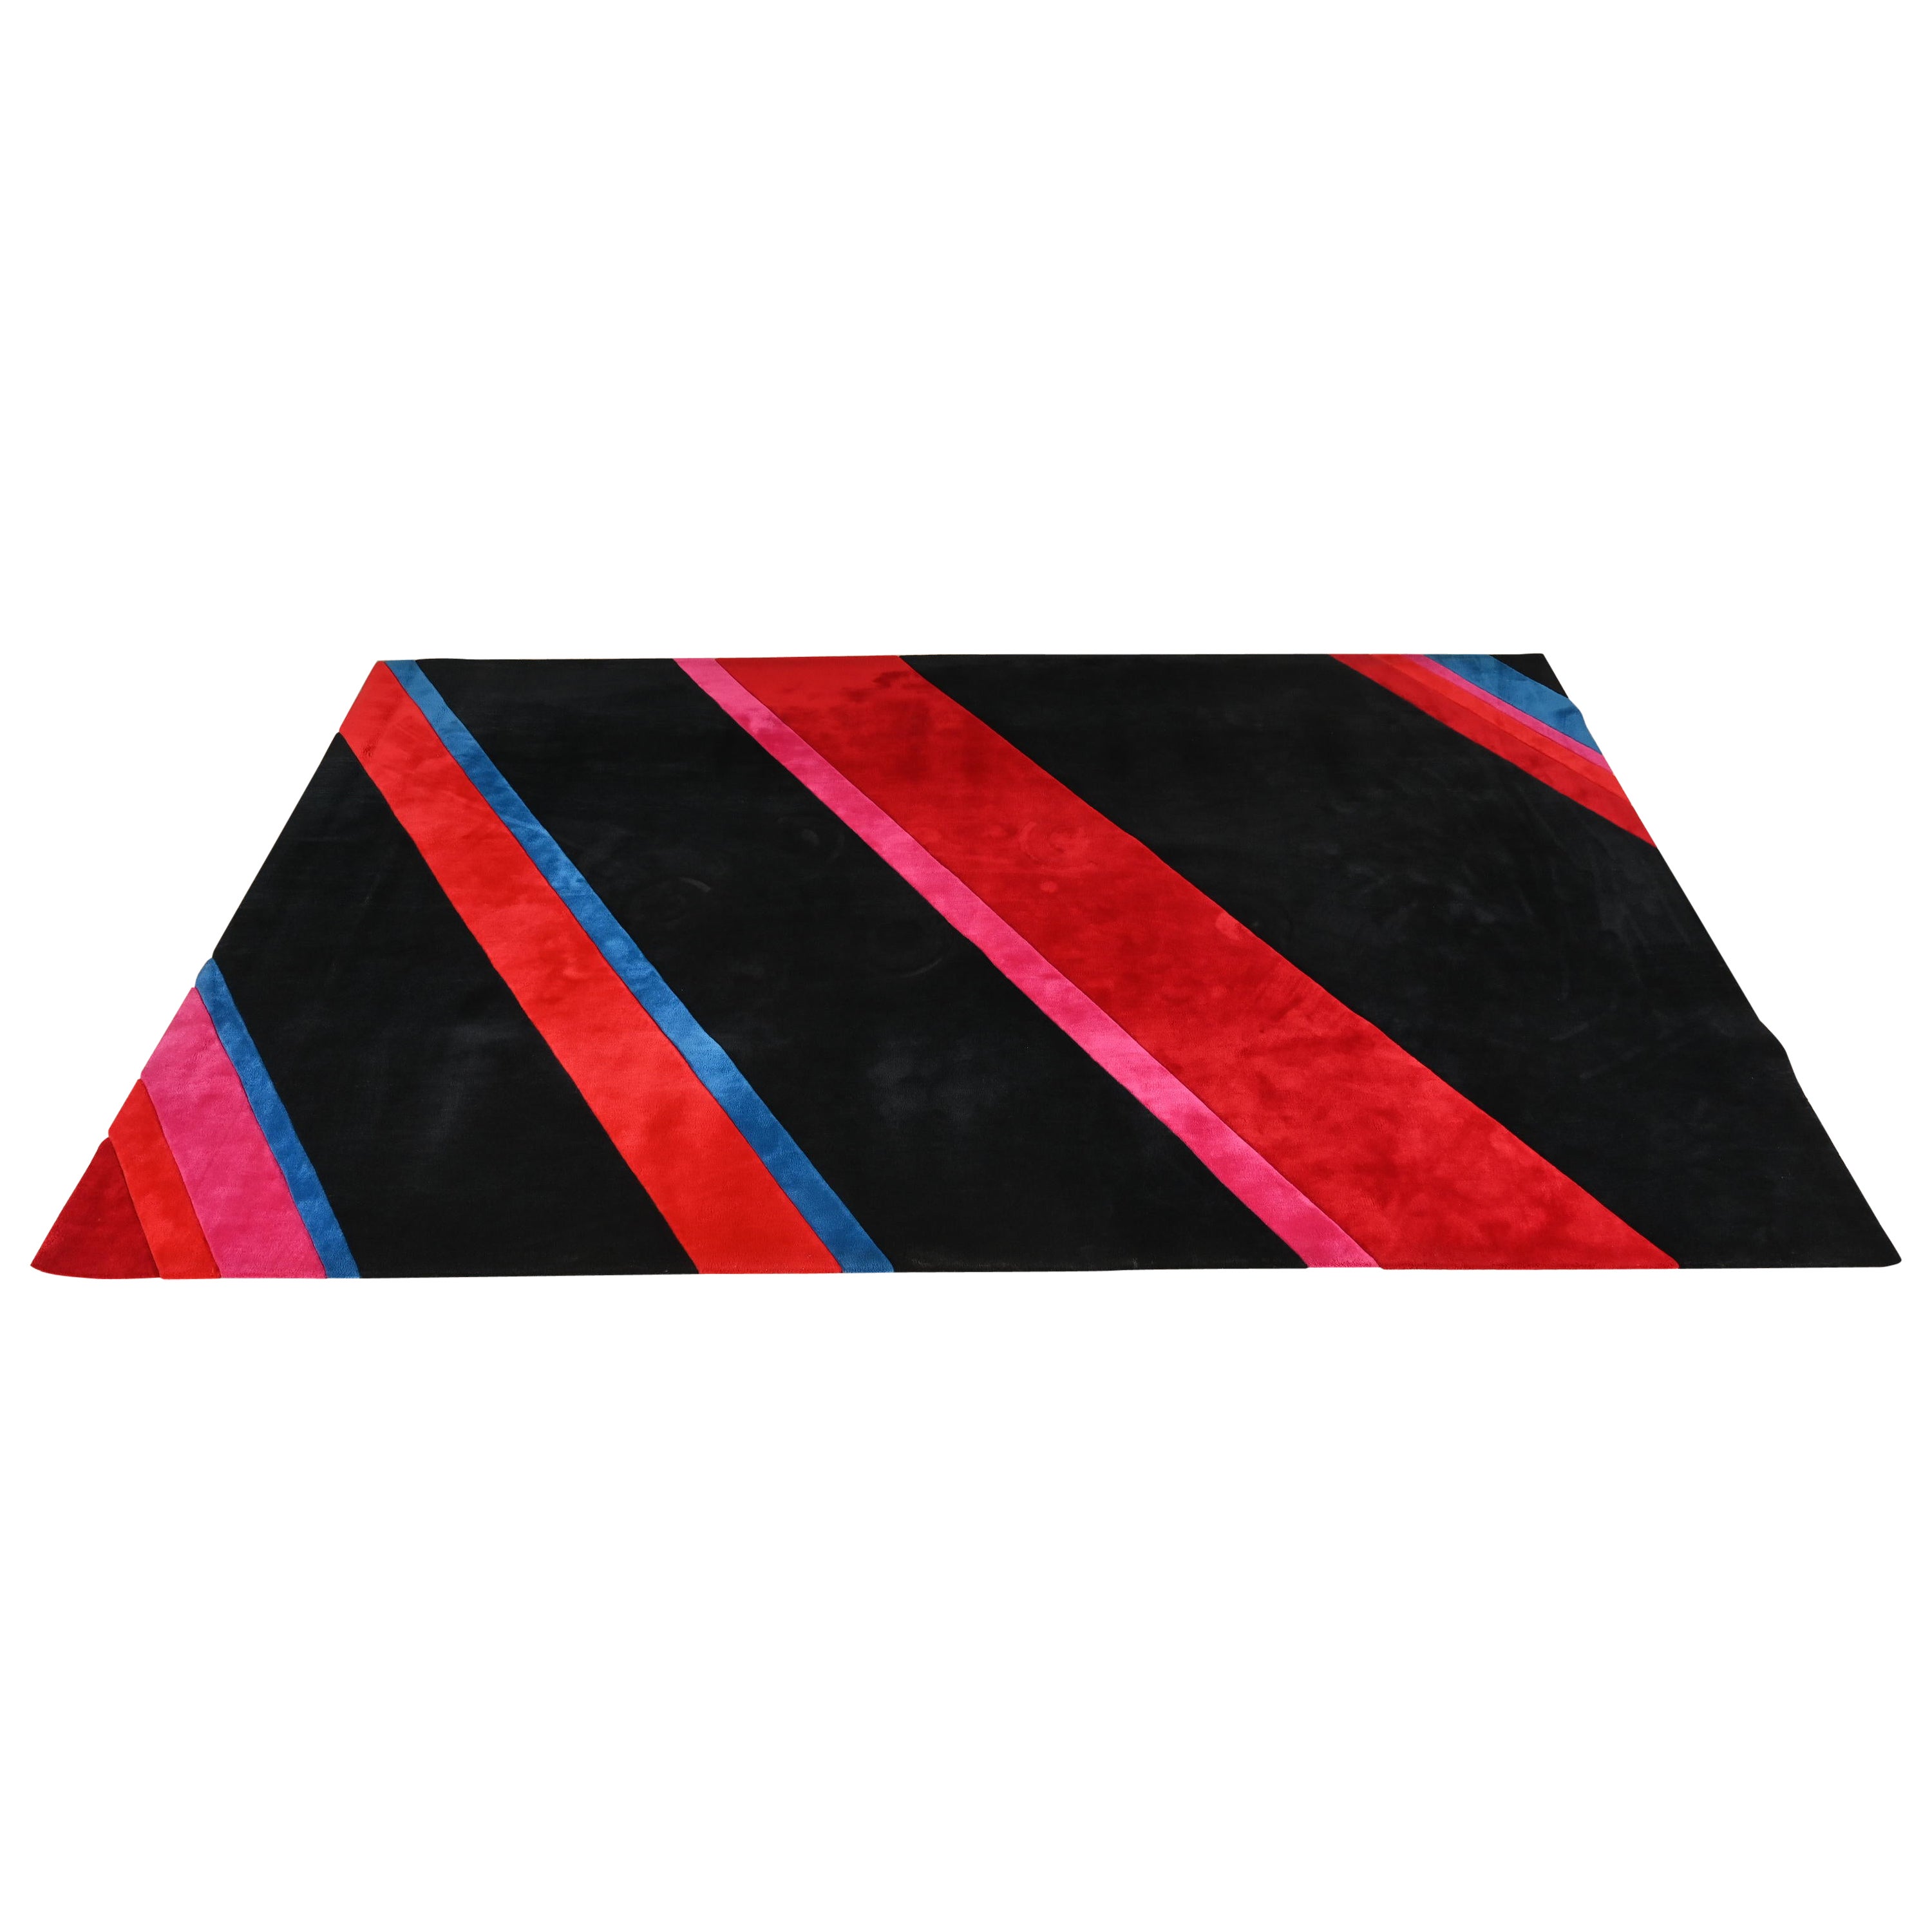 The Moderns Modern Large Room Size Abstract Striped Rug, Circa 1980s (Tapis à rayures abstraites de grande taille)